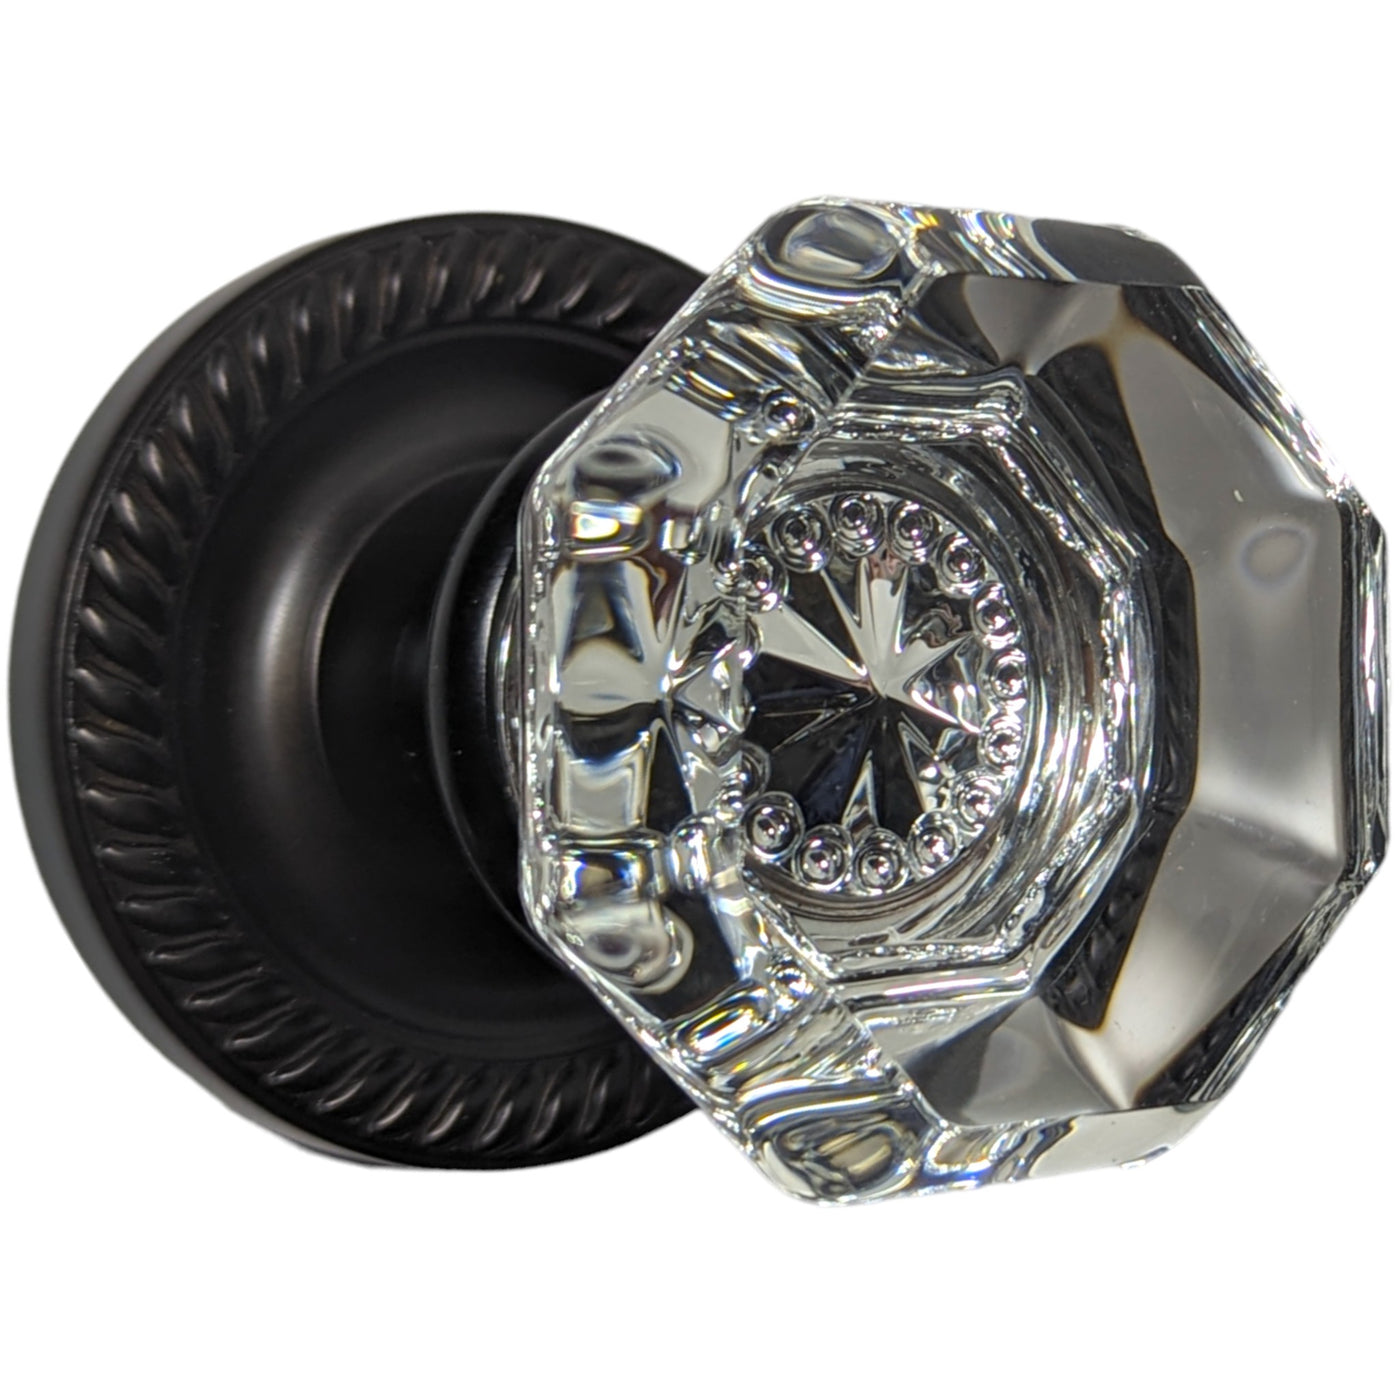 Georgian Roped Rosette Door Sets with Octagon Crystal Door Knobs (Several Finishes Available)